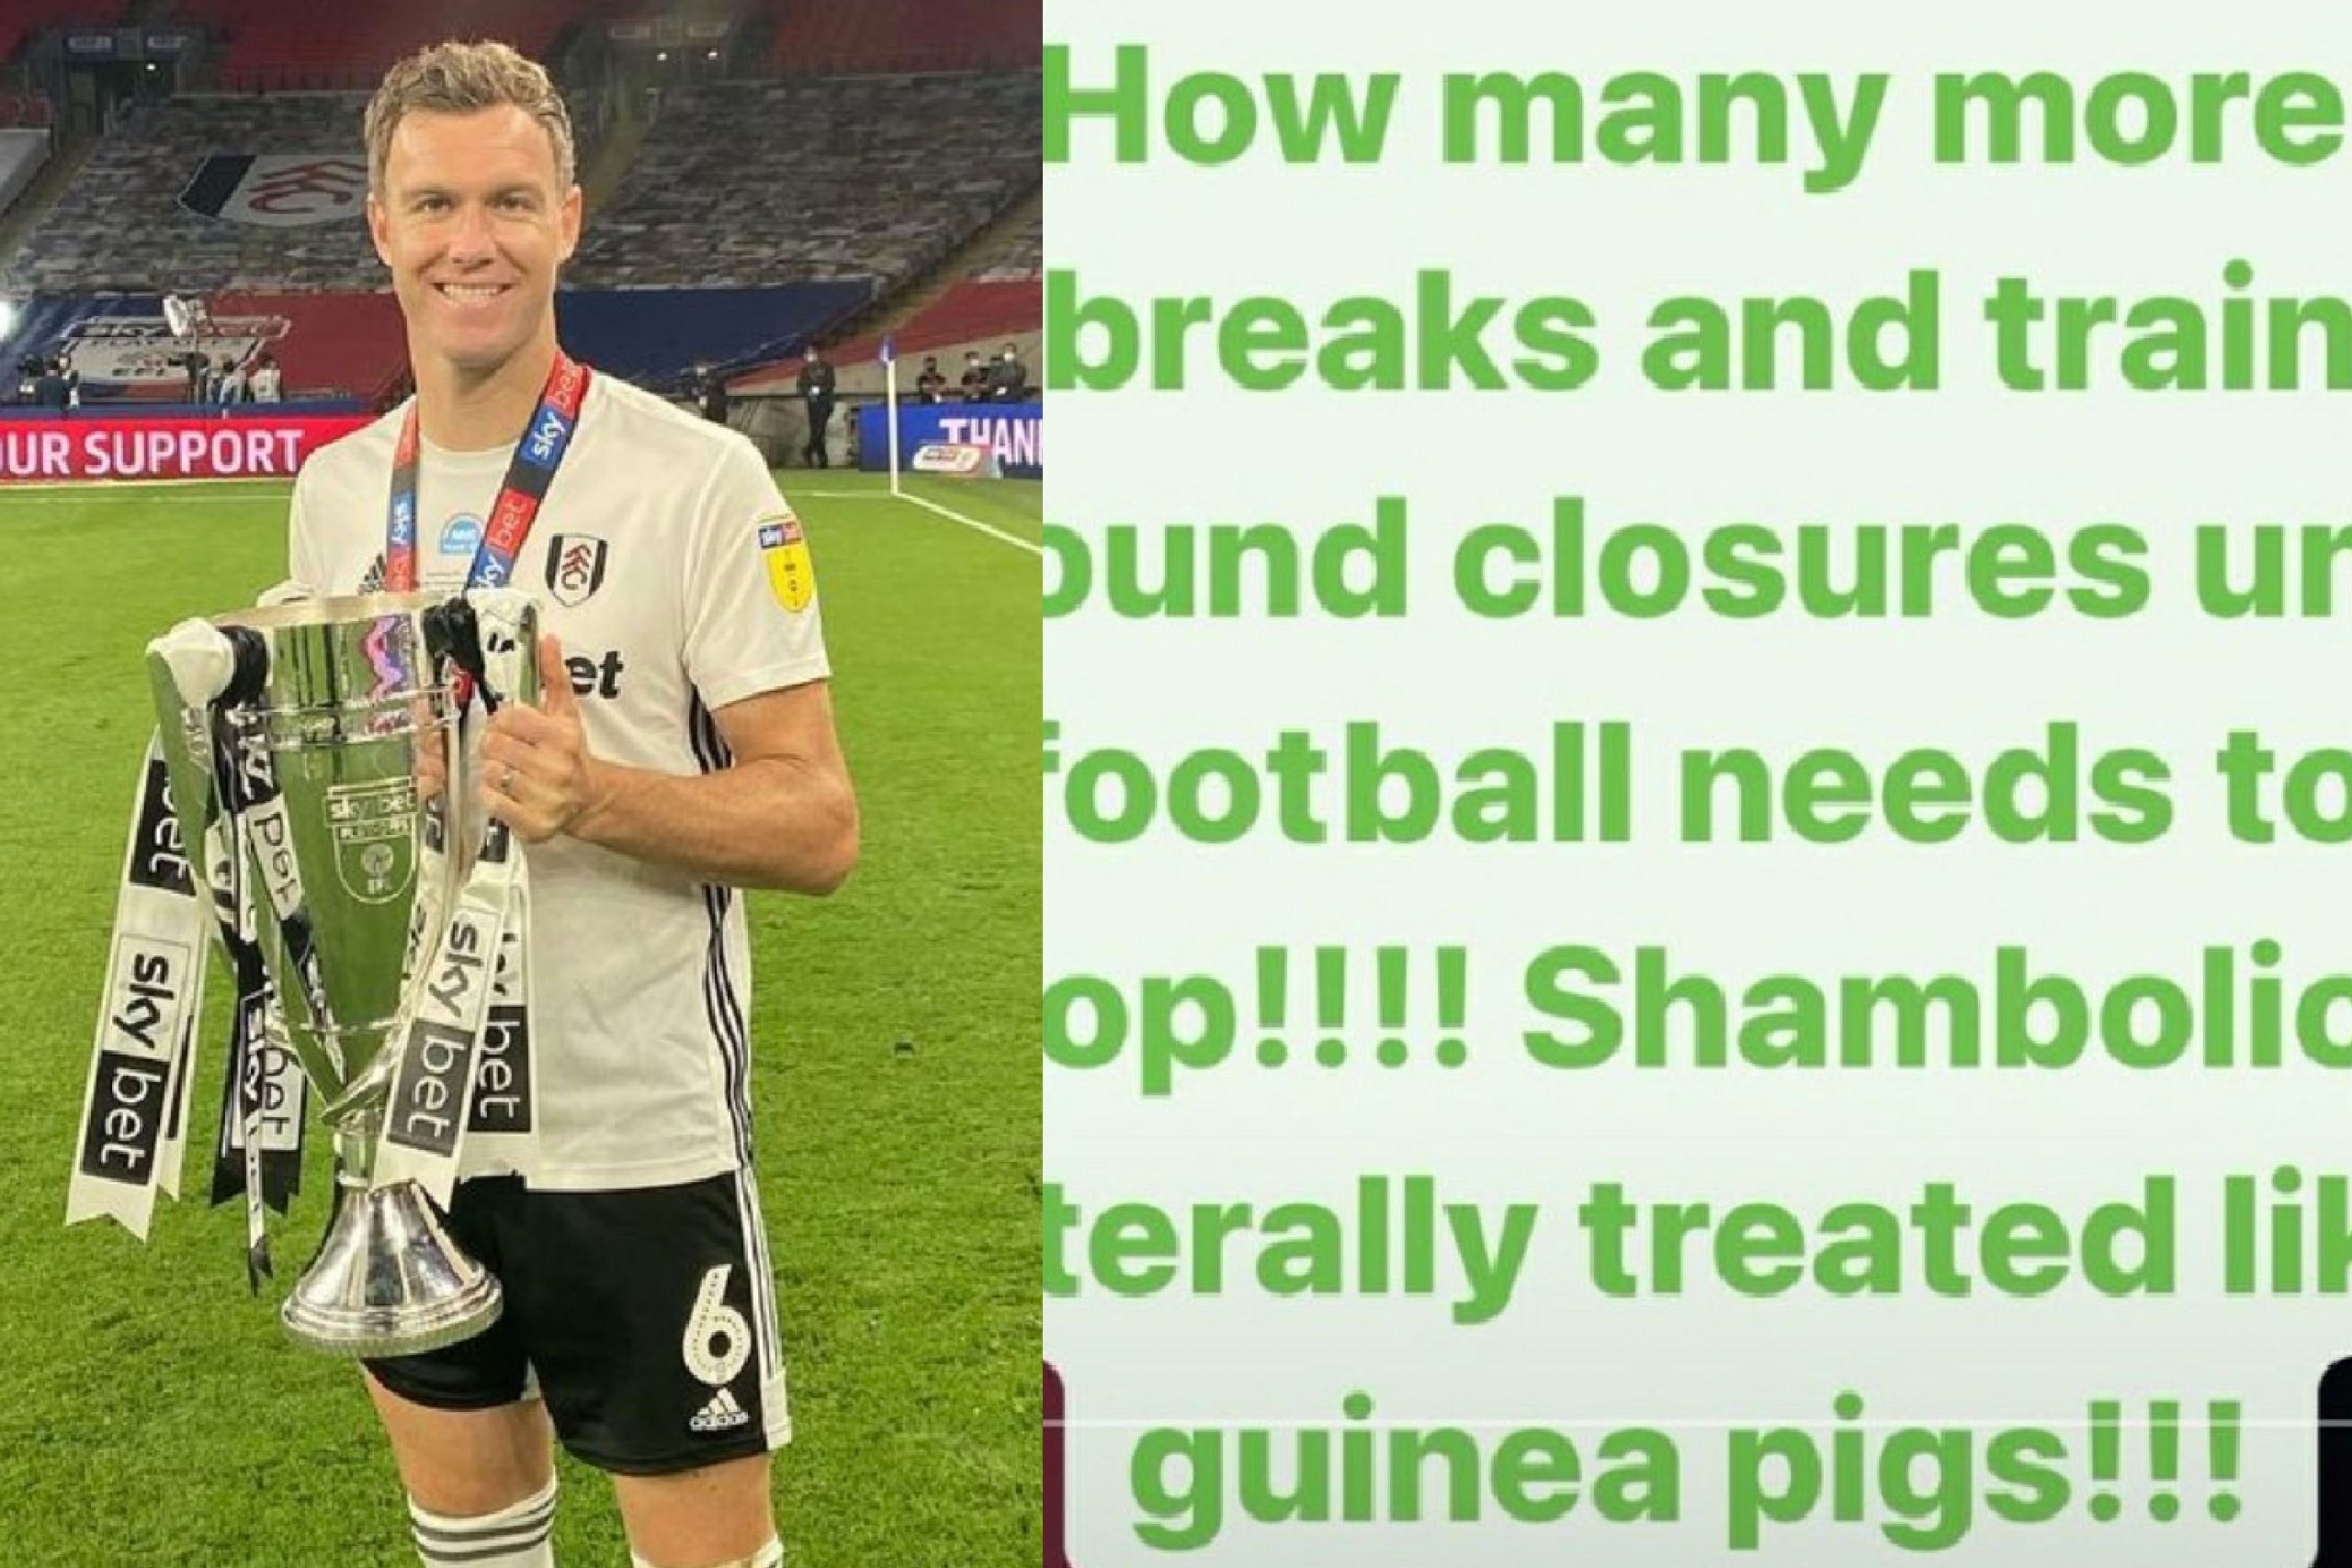 Kevin McDonald calls out the govt. for treating footballers like 'guinea pigs' amid Covid surge